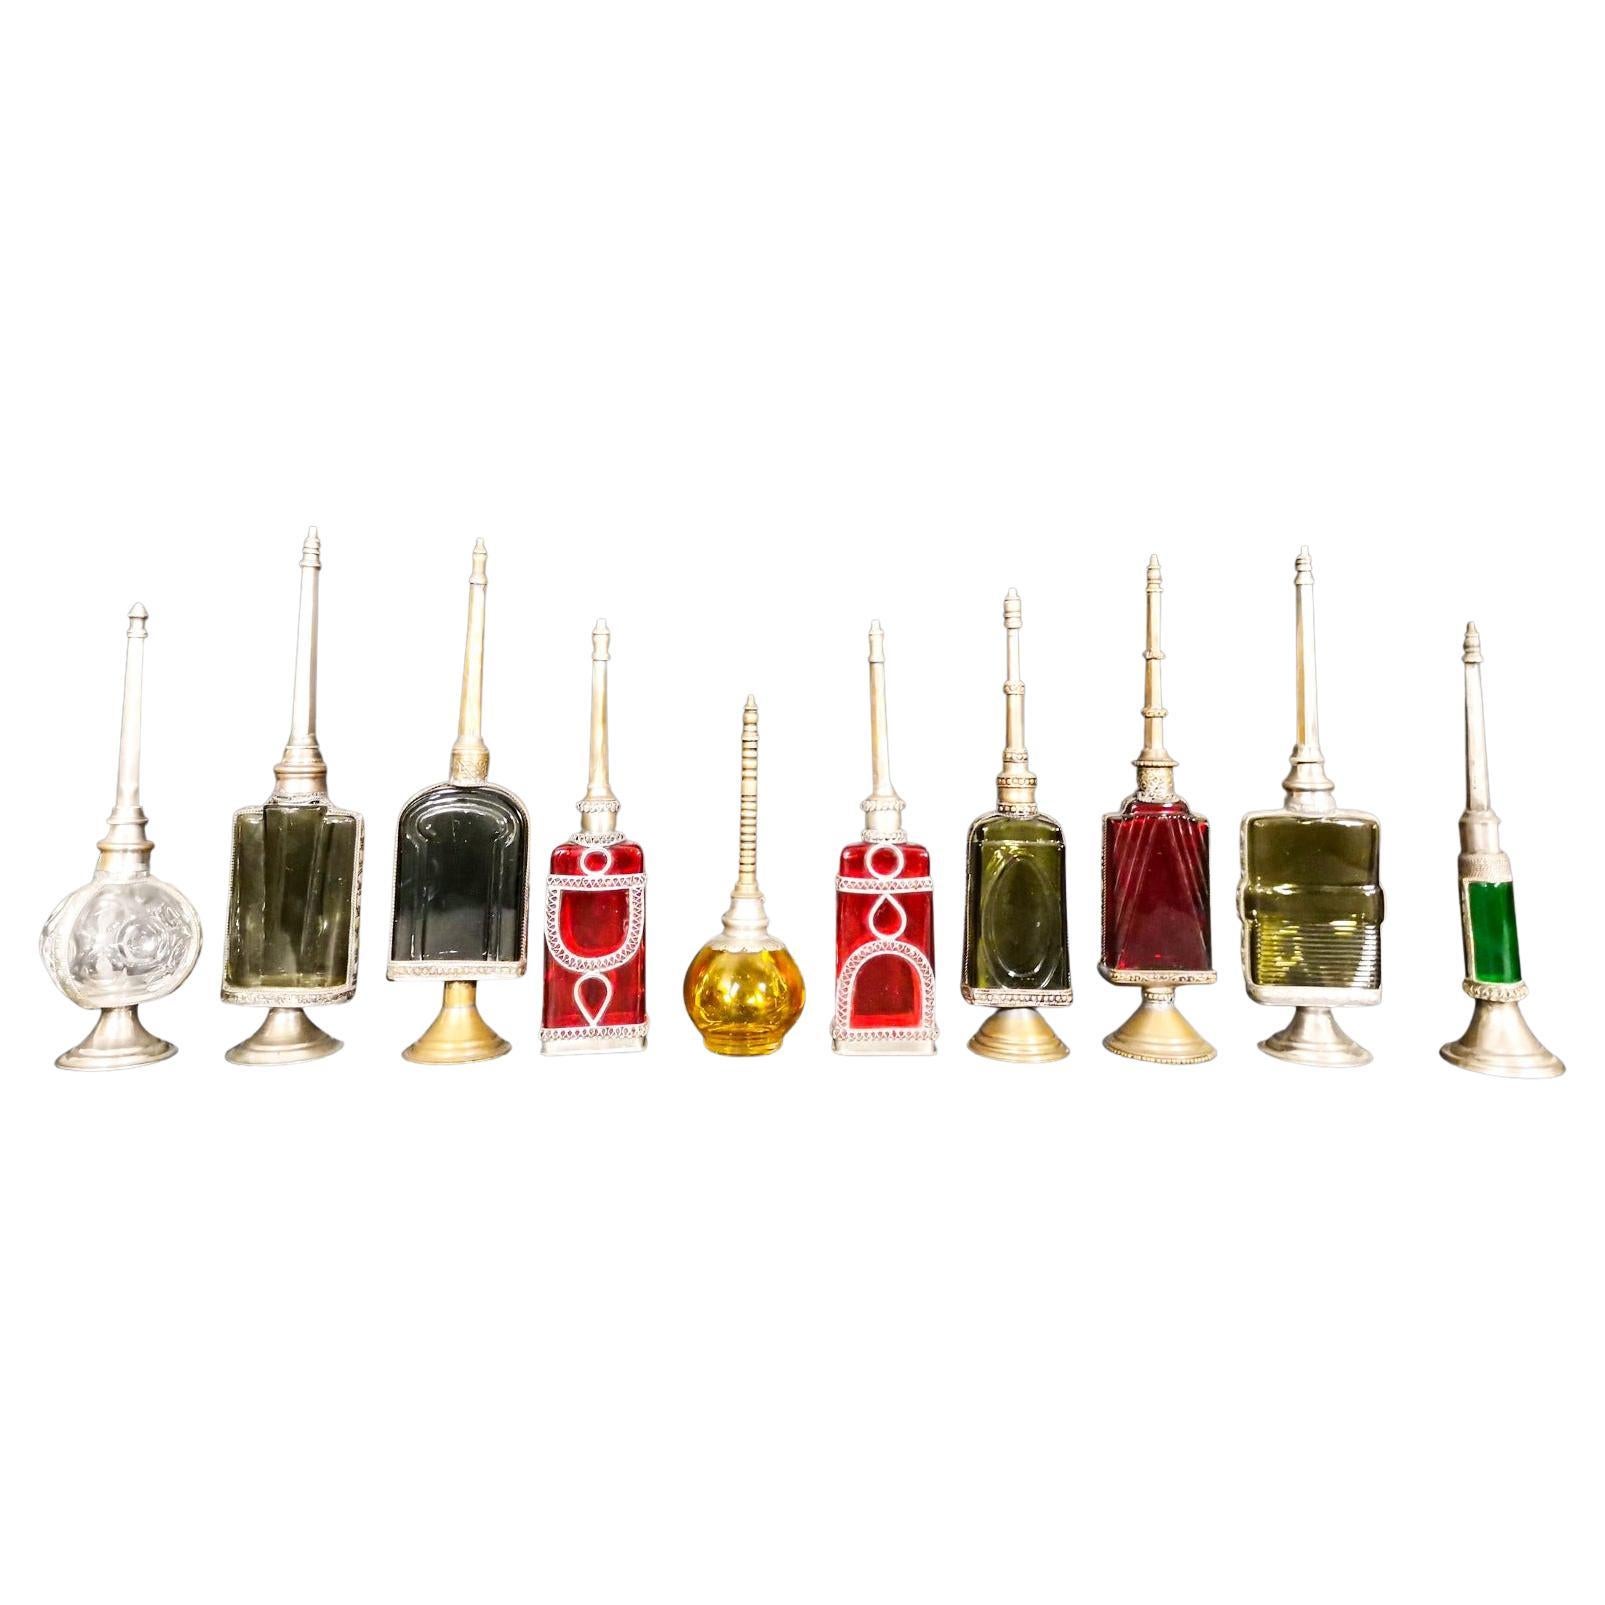 10 Bath Perfumes in Colored Glass and Silver Metal, Early 20th Century